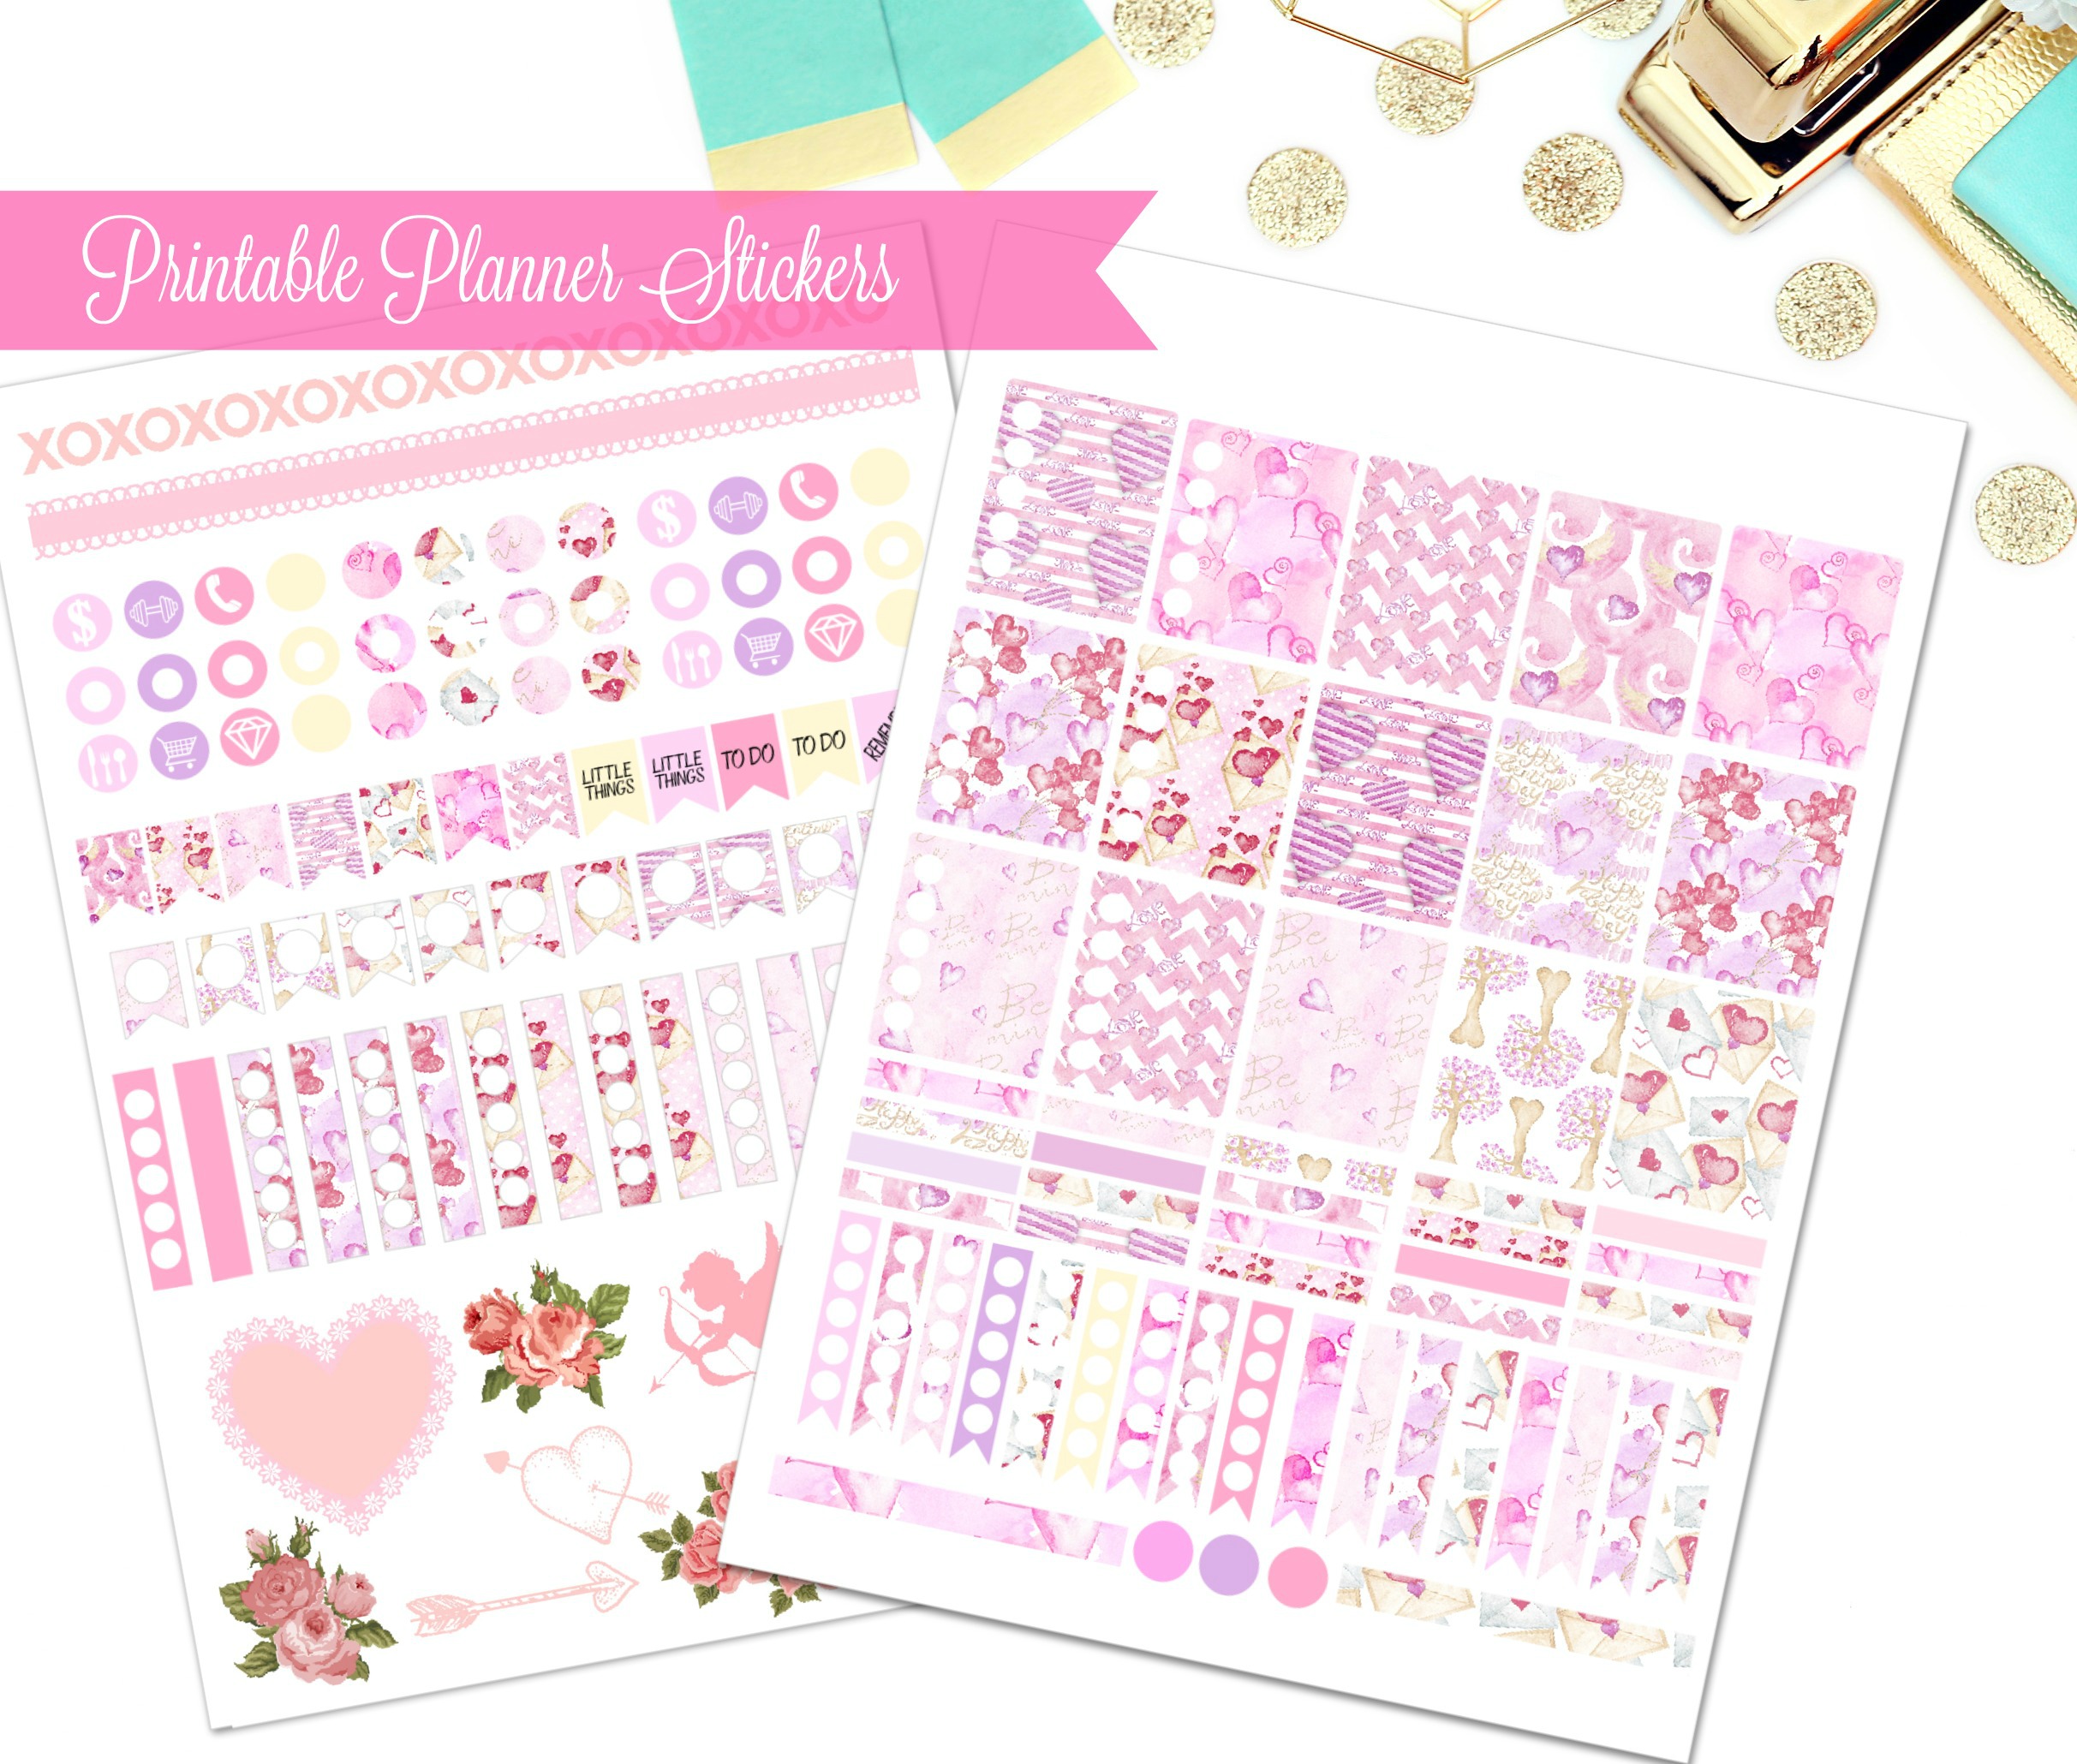 February Planner Stickers: Free Printable Valentine Planner Stickers